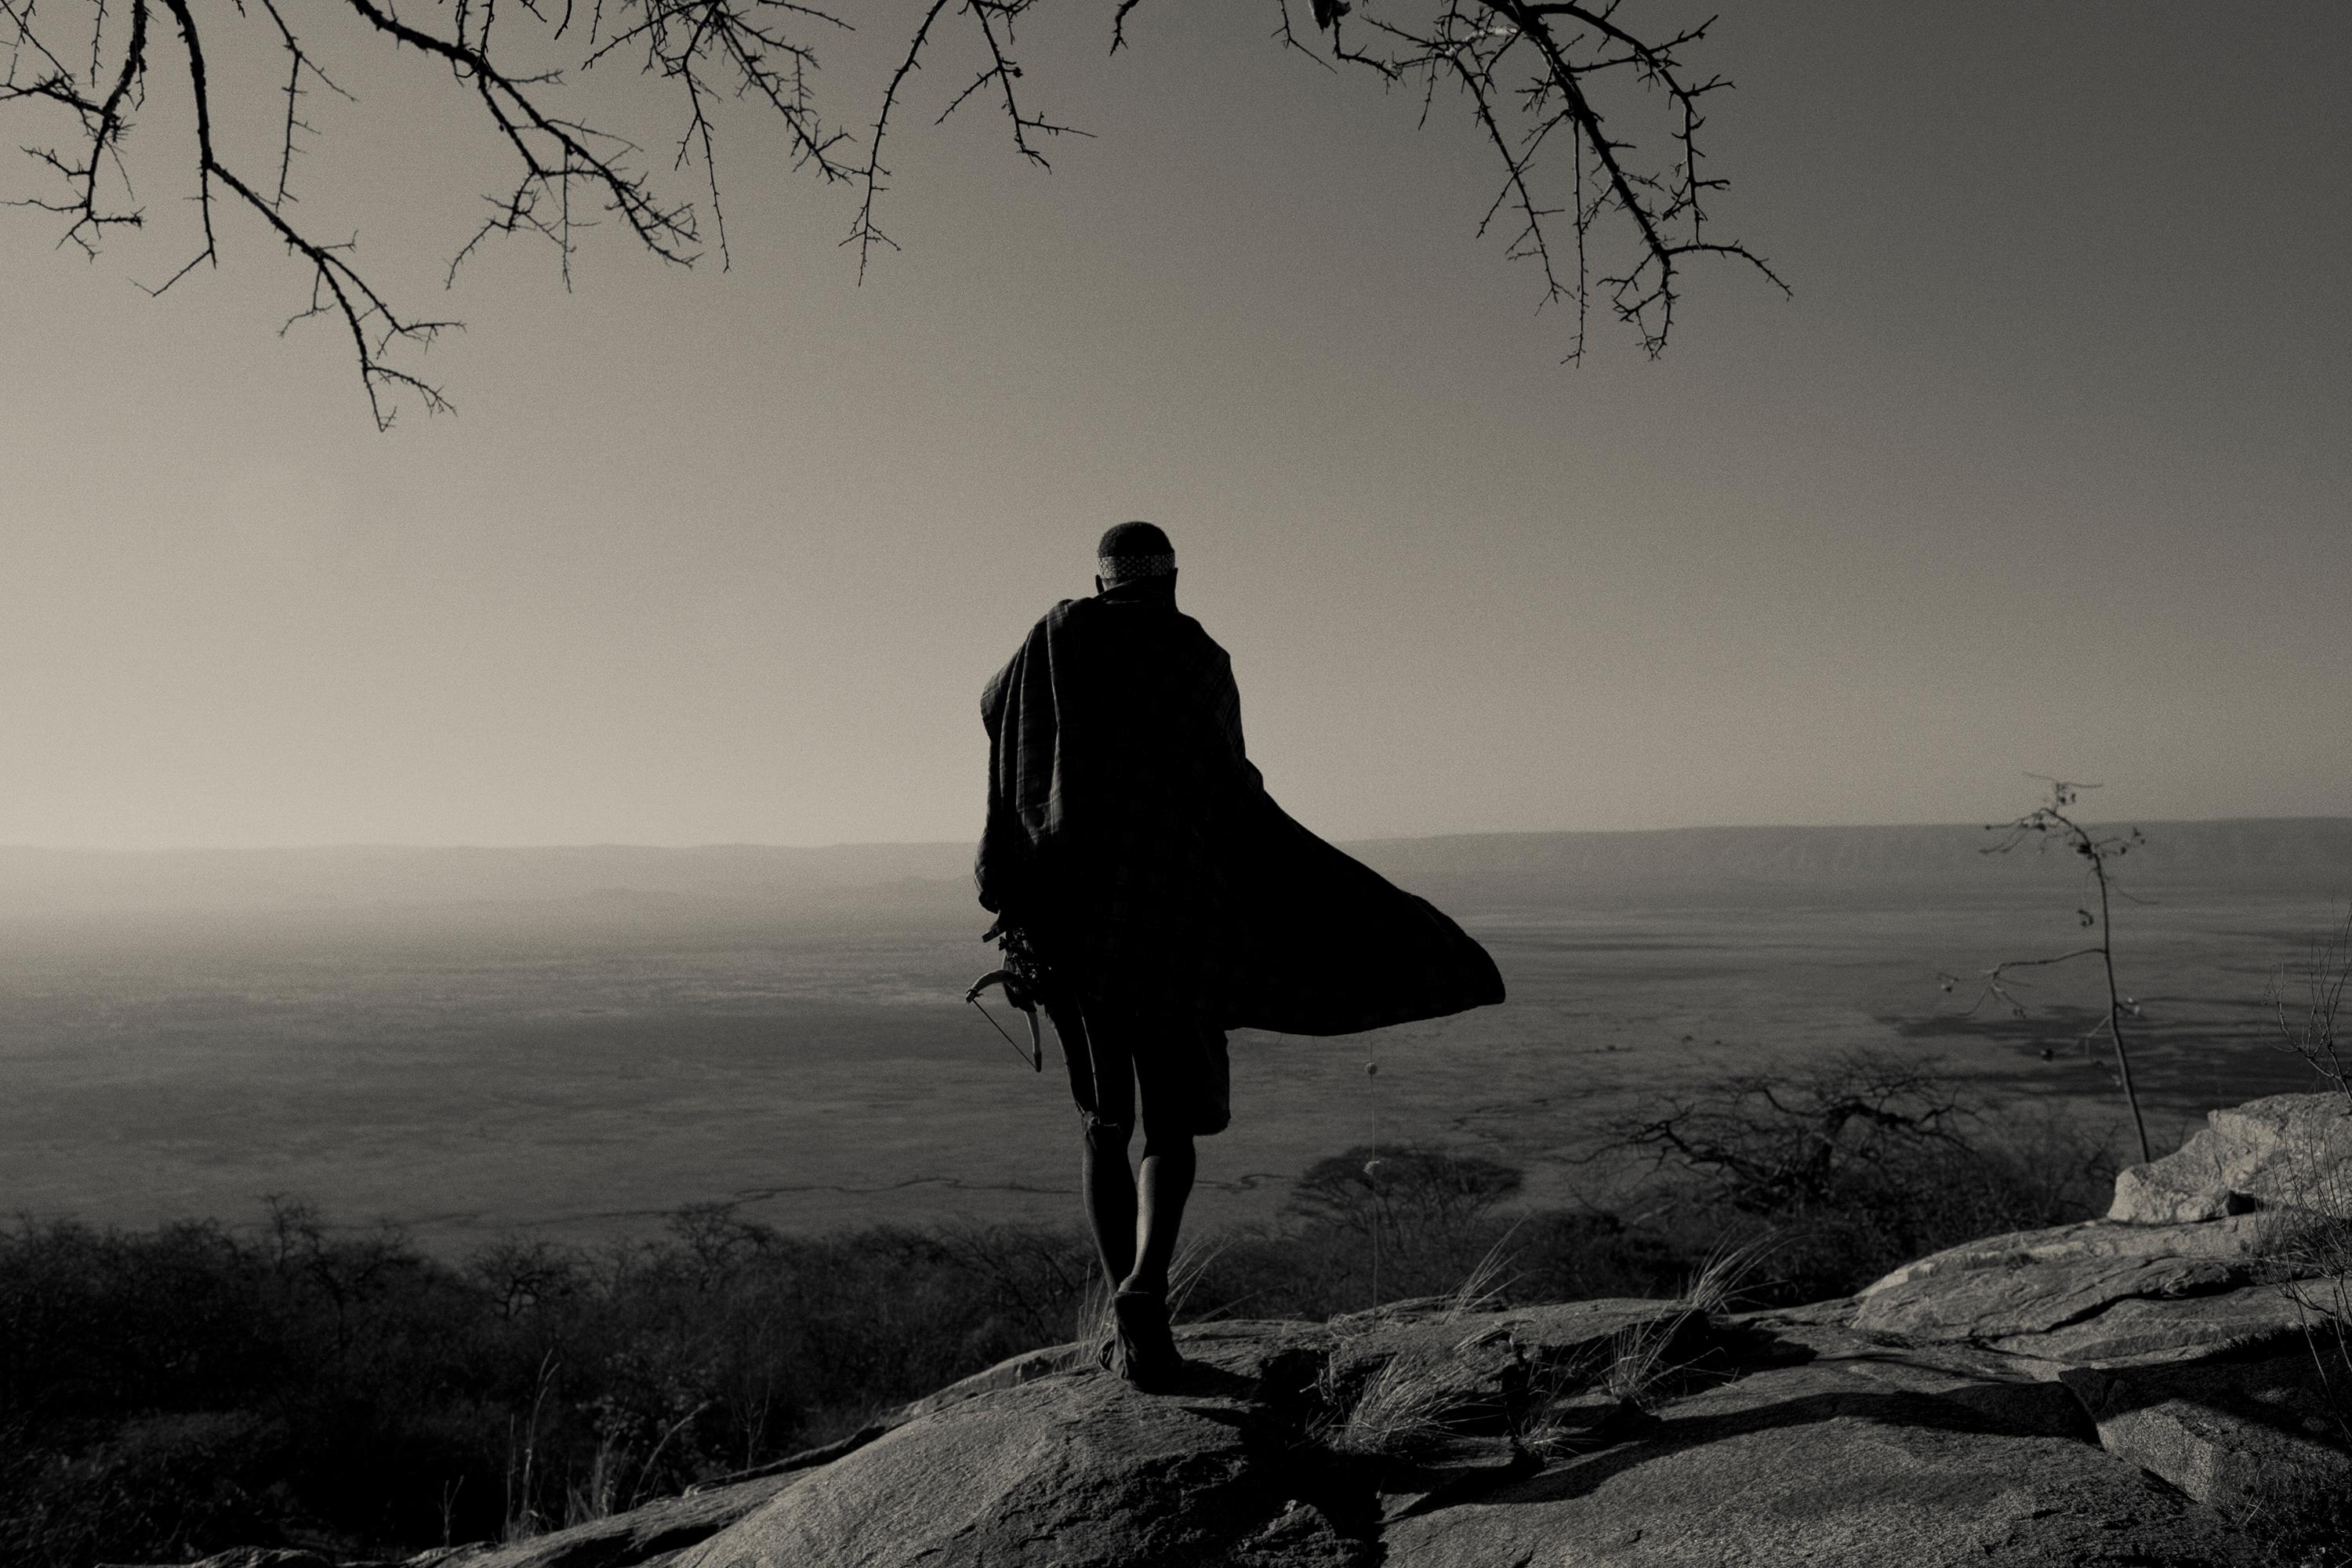 'HADZABE SKYLINE,'  a black and white photograph by Nicol Ragland of a tall tribal figure from the Hadzabe in Tanzania, overlooking the vast sparse landscape.  The archival giclee photographic print is 1/40 and is signed by the artist.  The print is